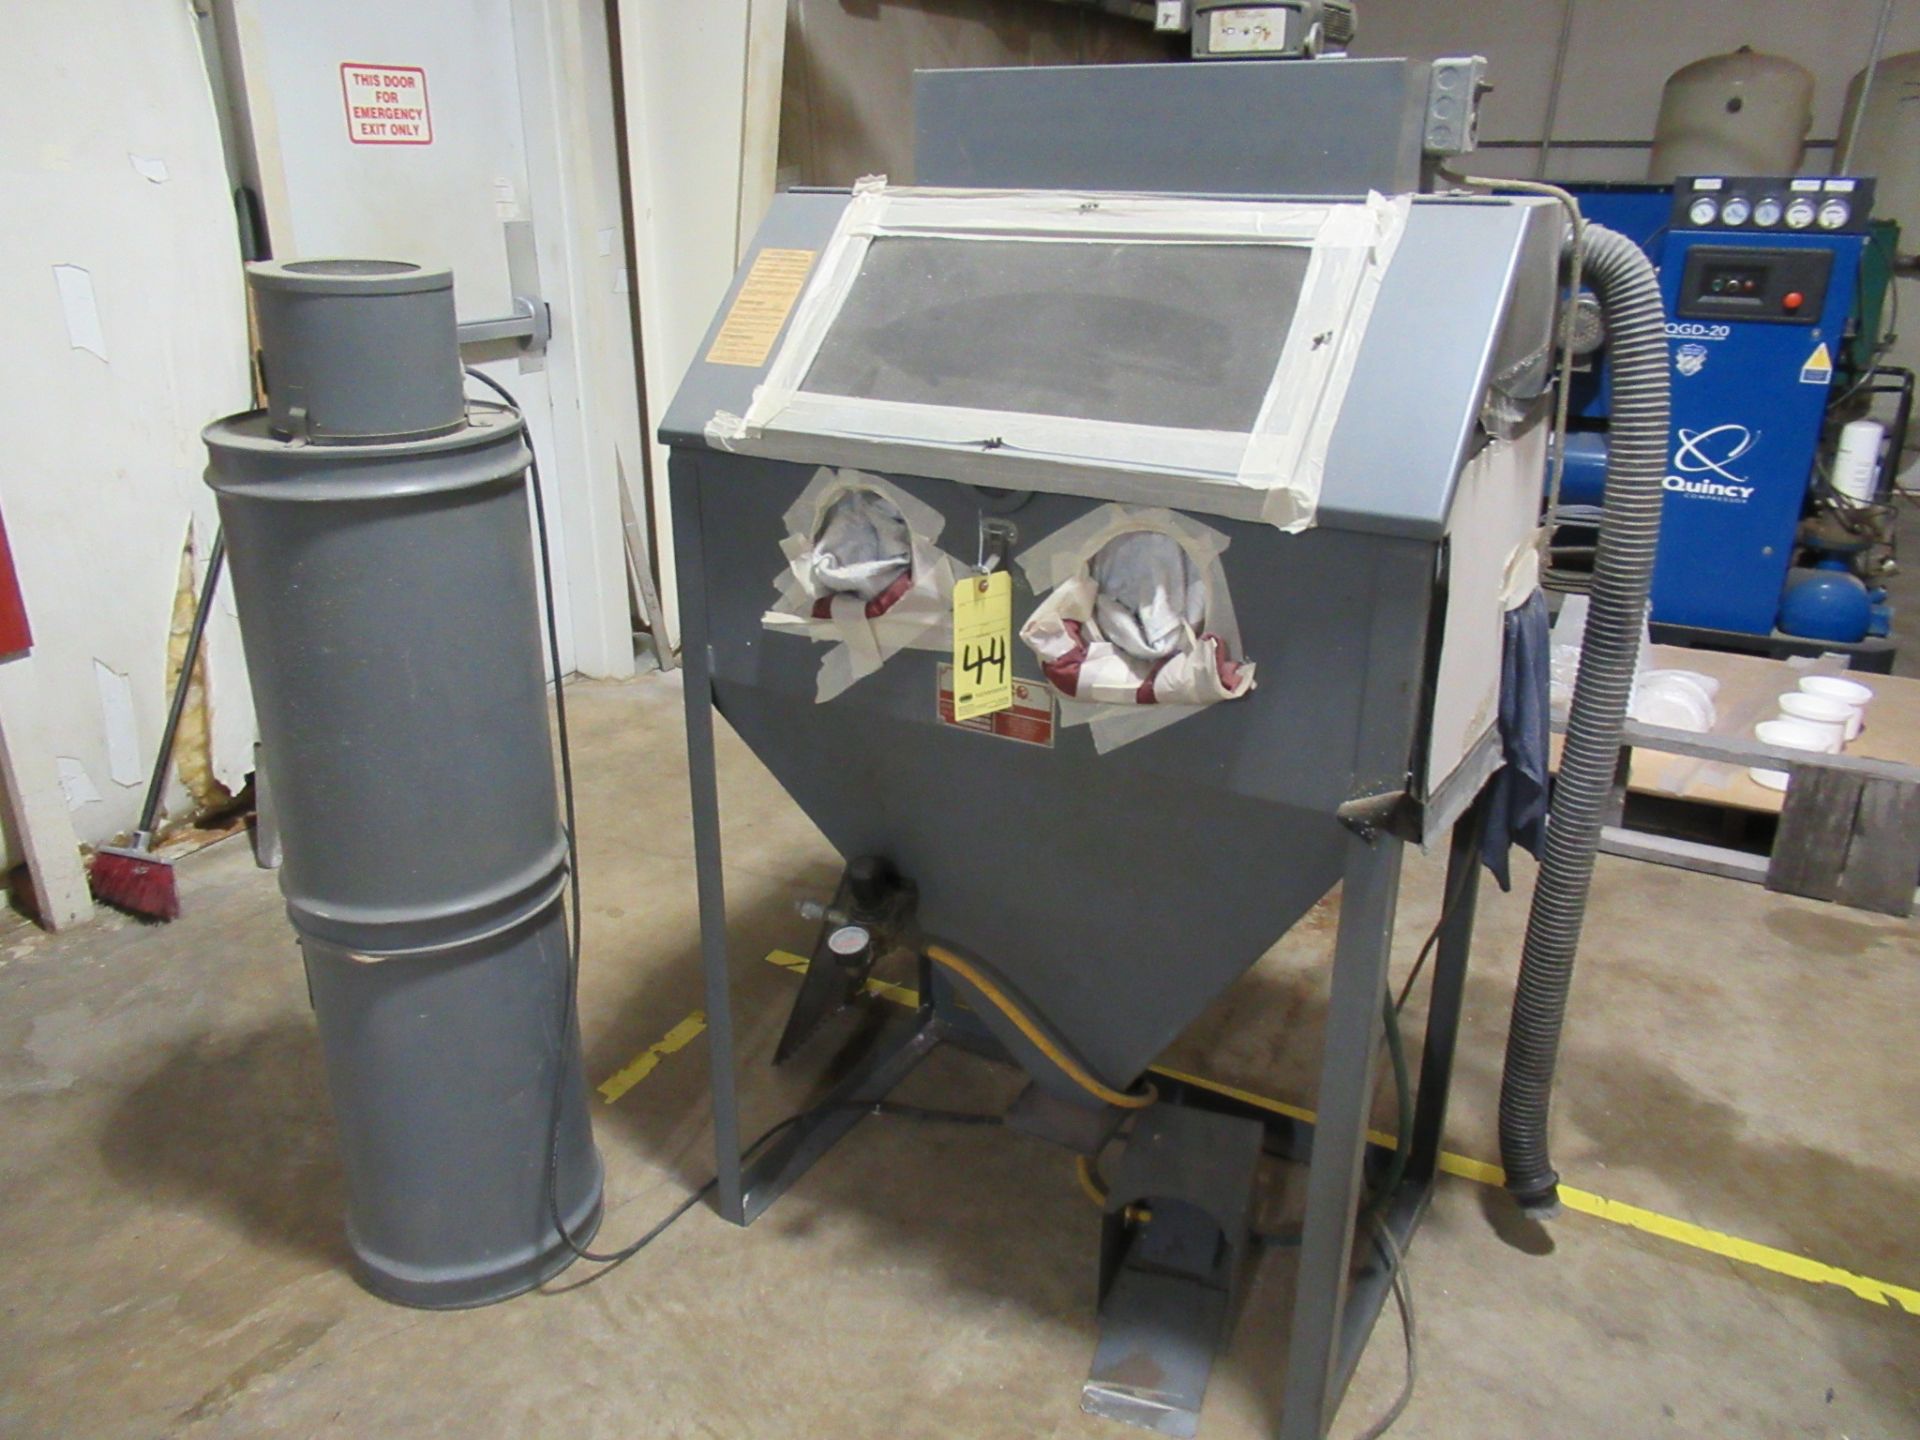 BLAST CABINET, TRINCO 36" MDL. 36/BP, dust collection system, S/N 54754-1 (Location C: Moore